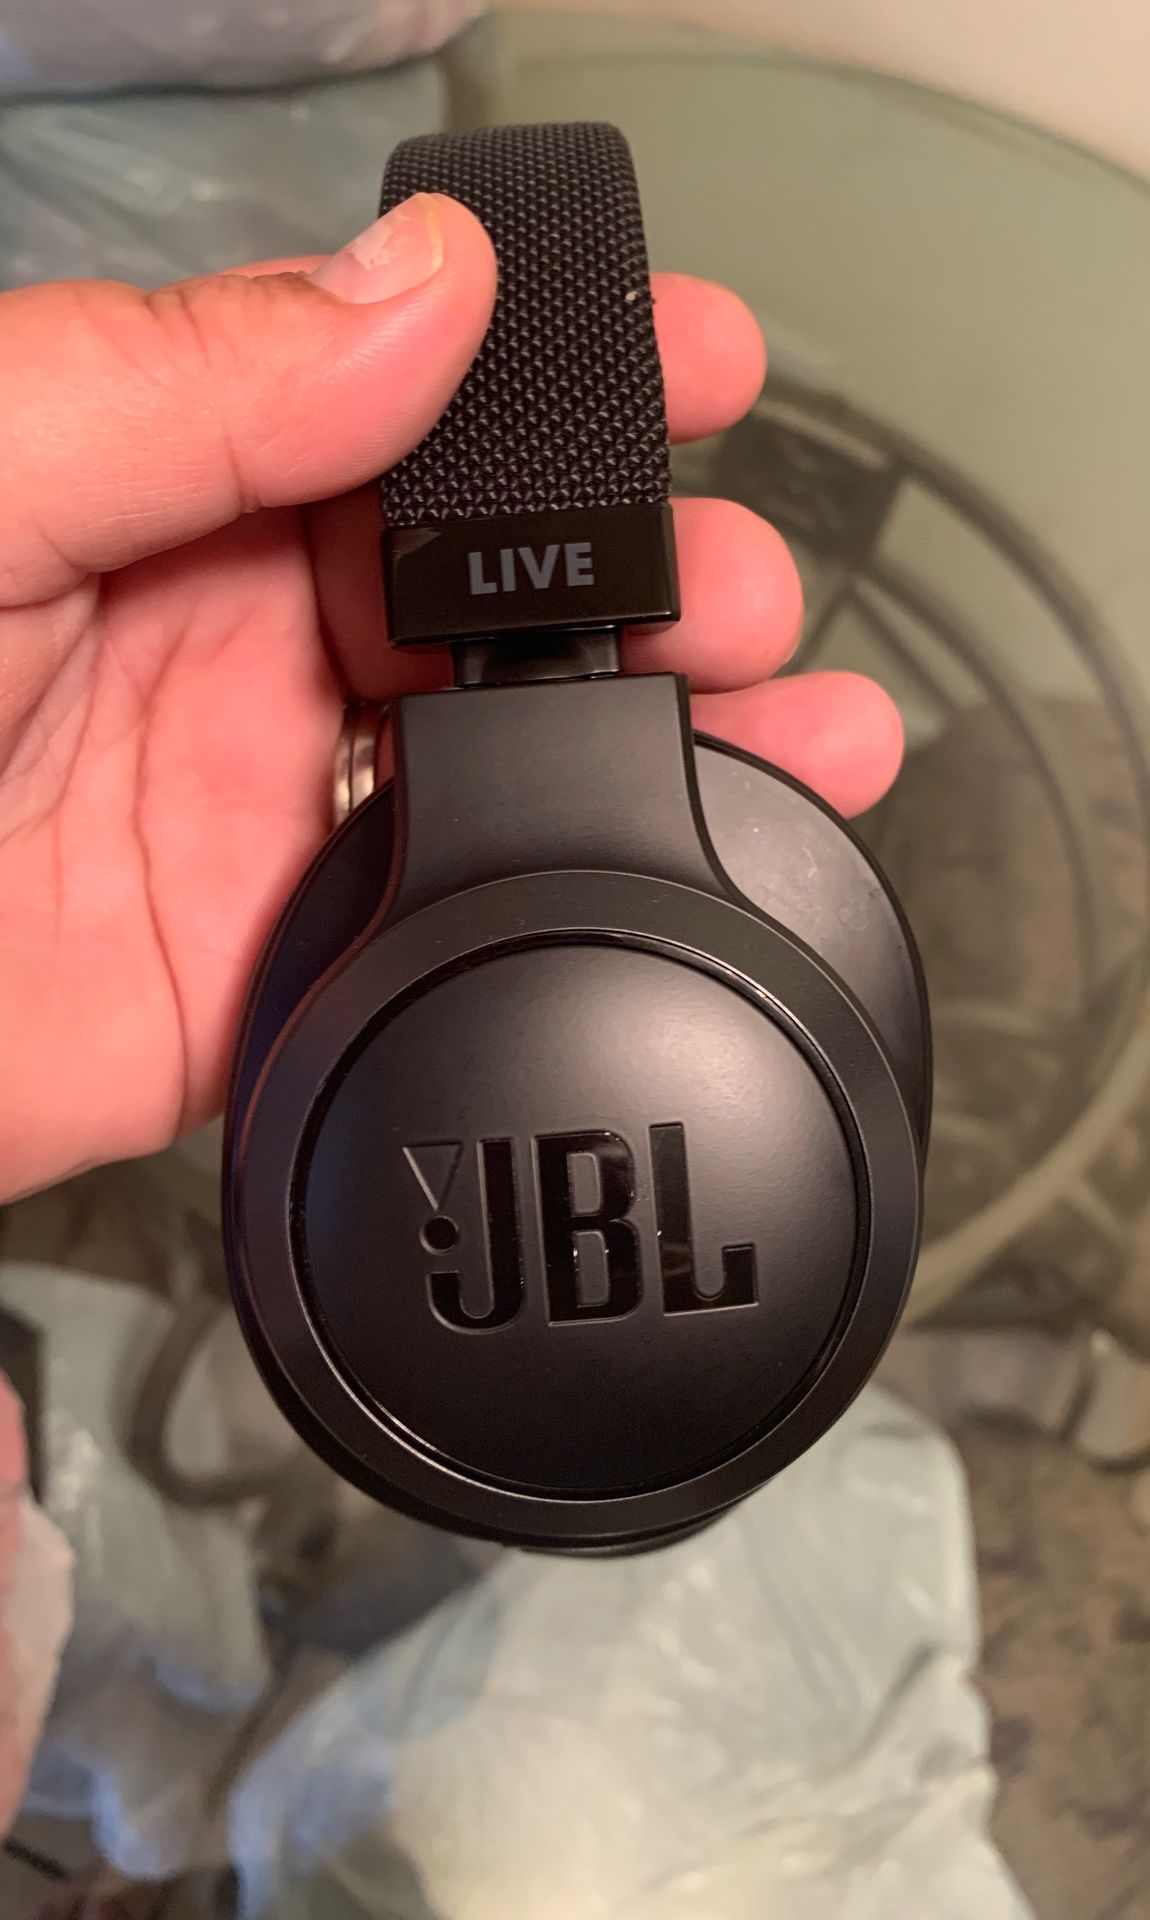 JBL Live Bluetooth headphones new out the box. With google assistance